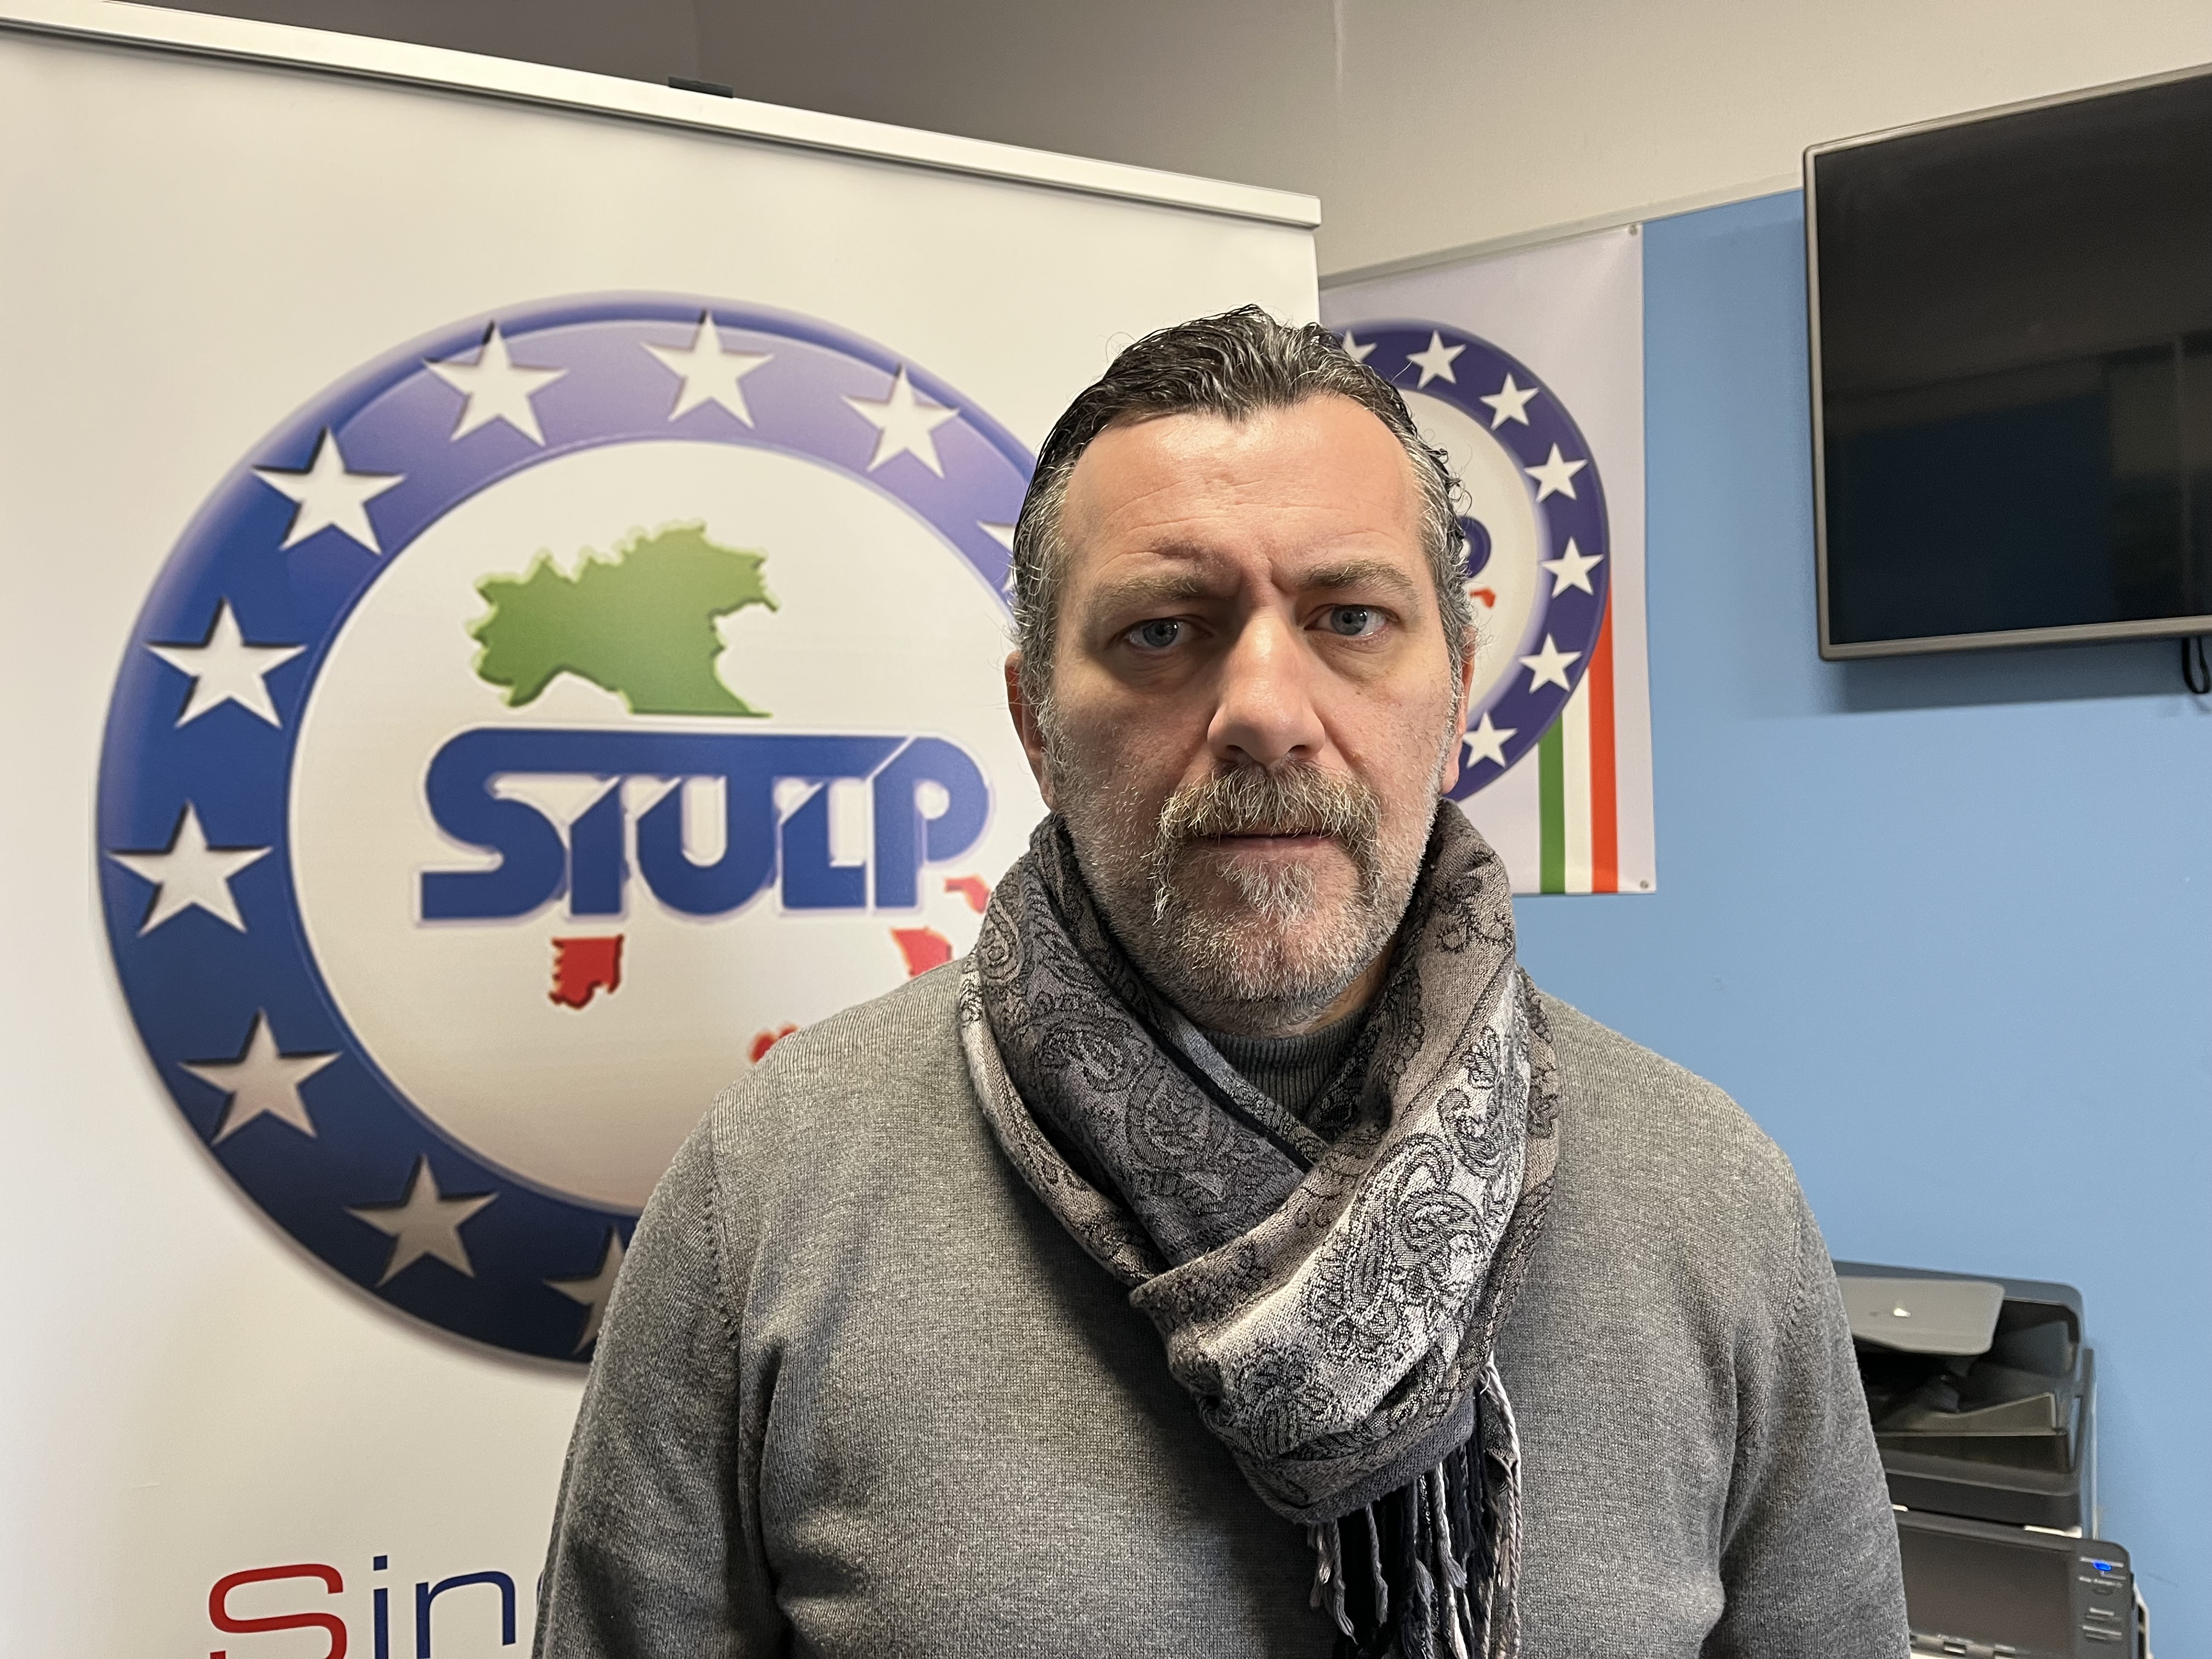 Paolo Magrone (Siulp)